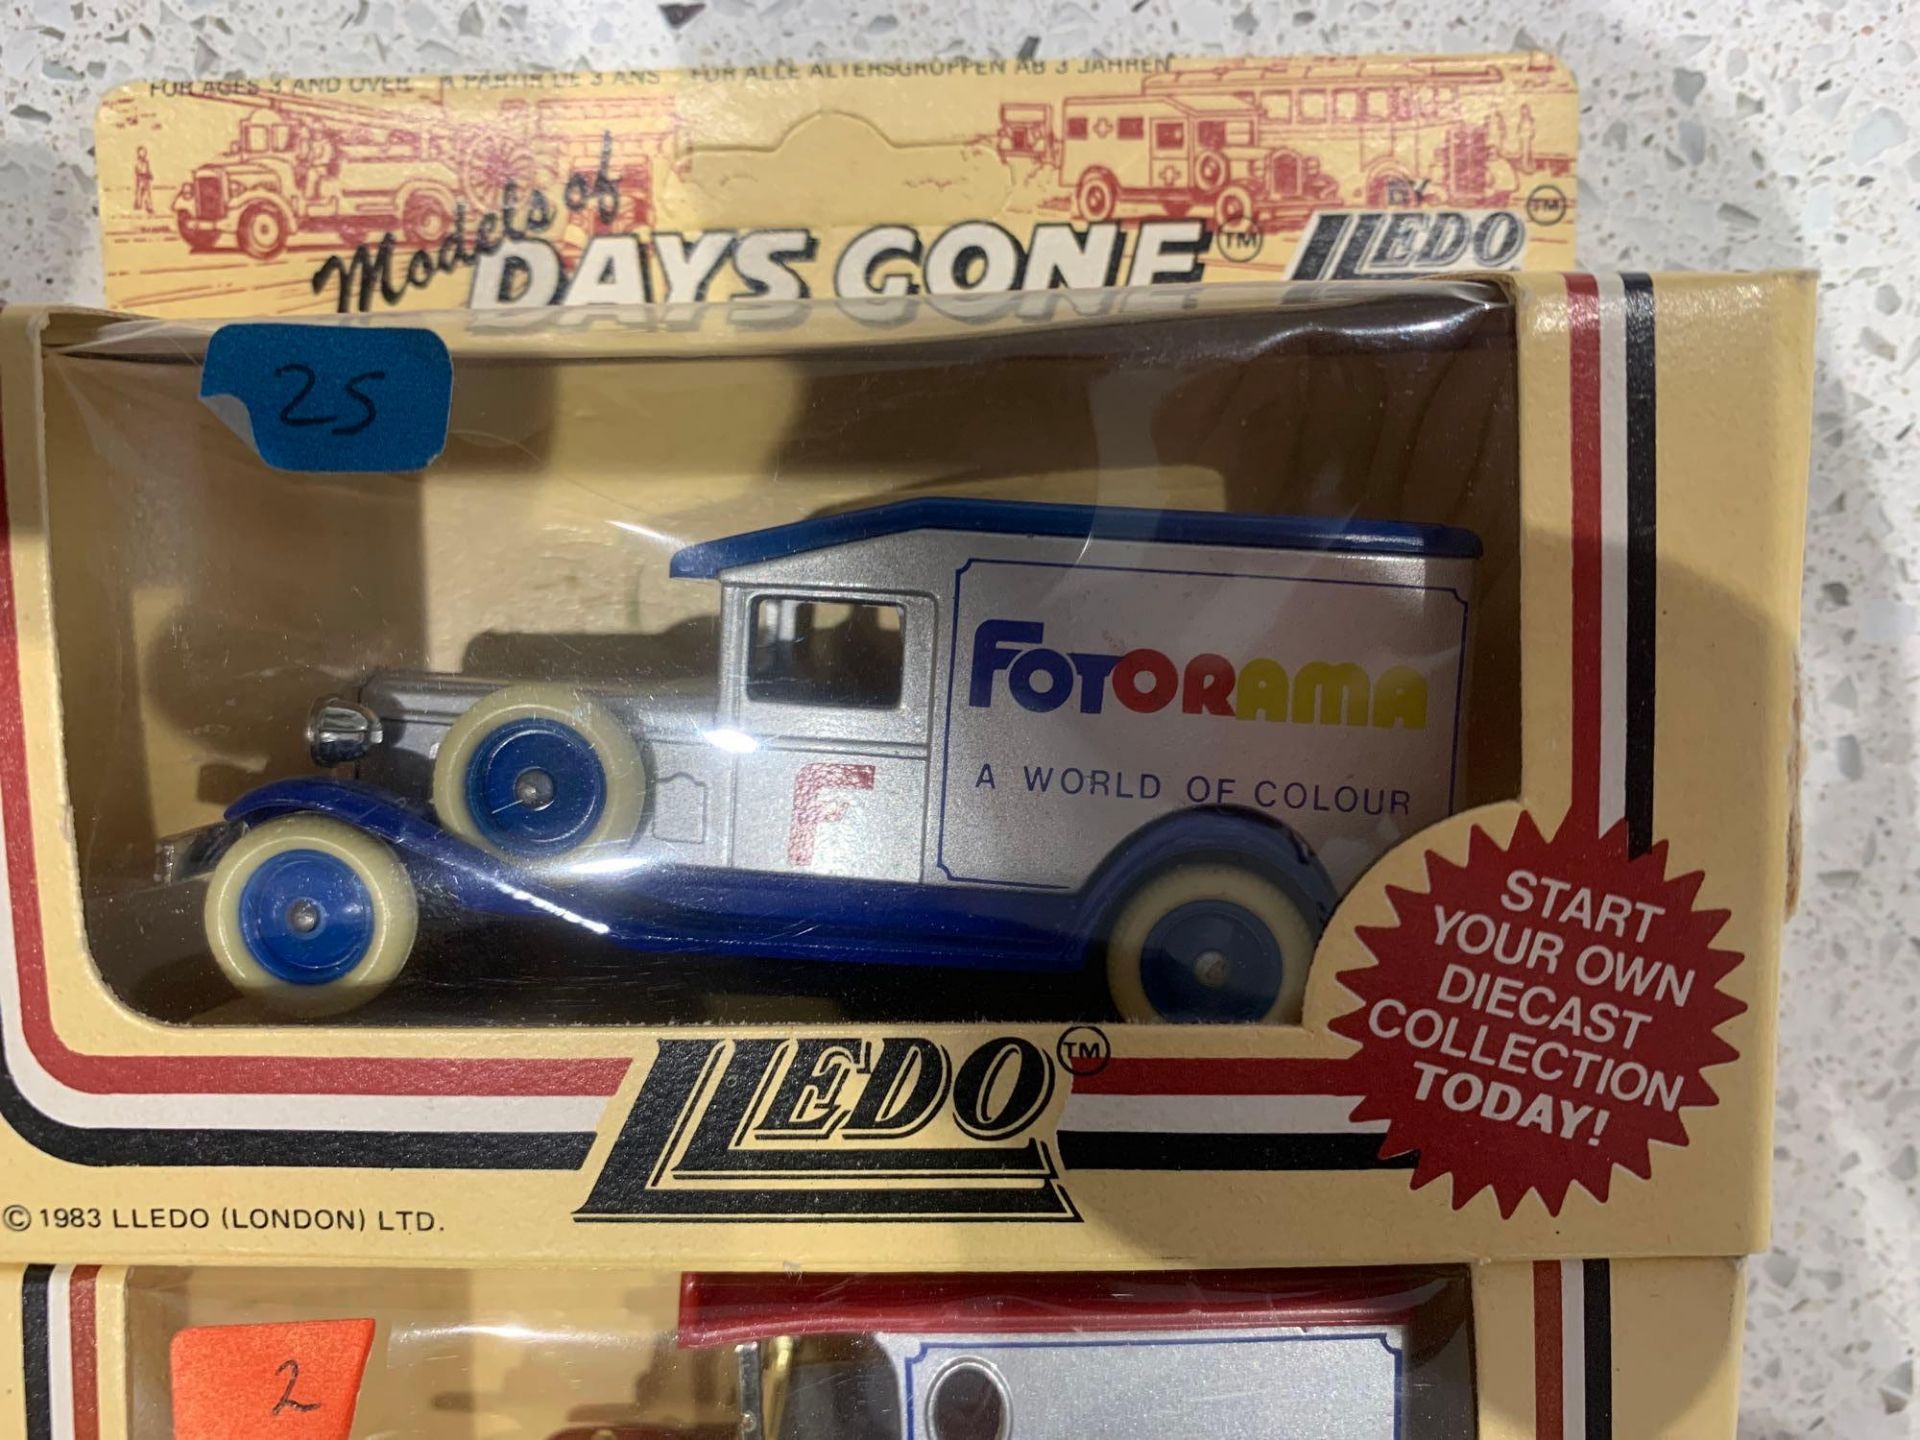 3 X Lledo Days Gone By Made In England Fotorama A World Of Colour Delivery Van 1/43 Scale - Image 5 of 5